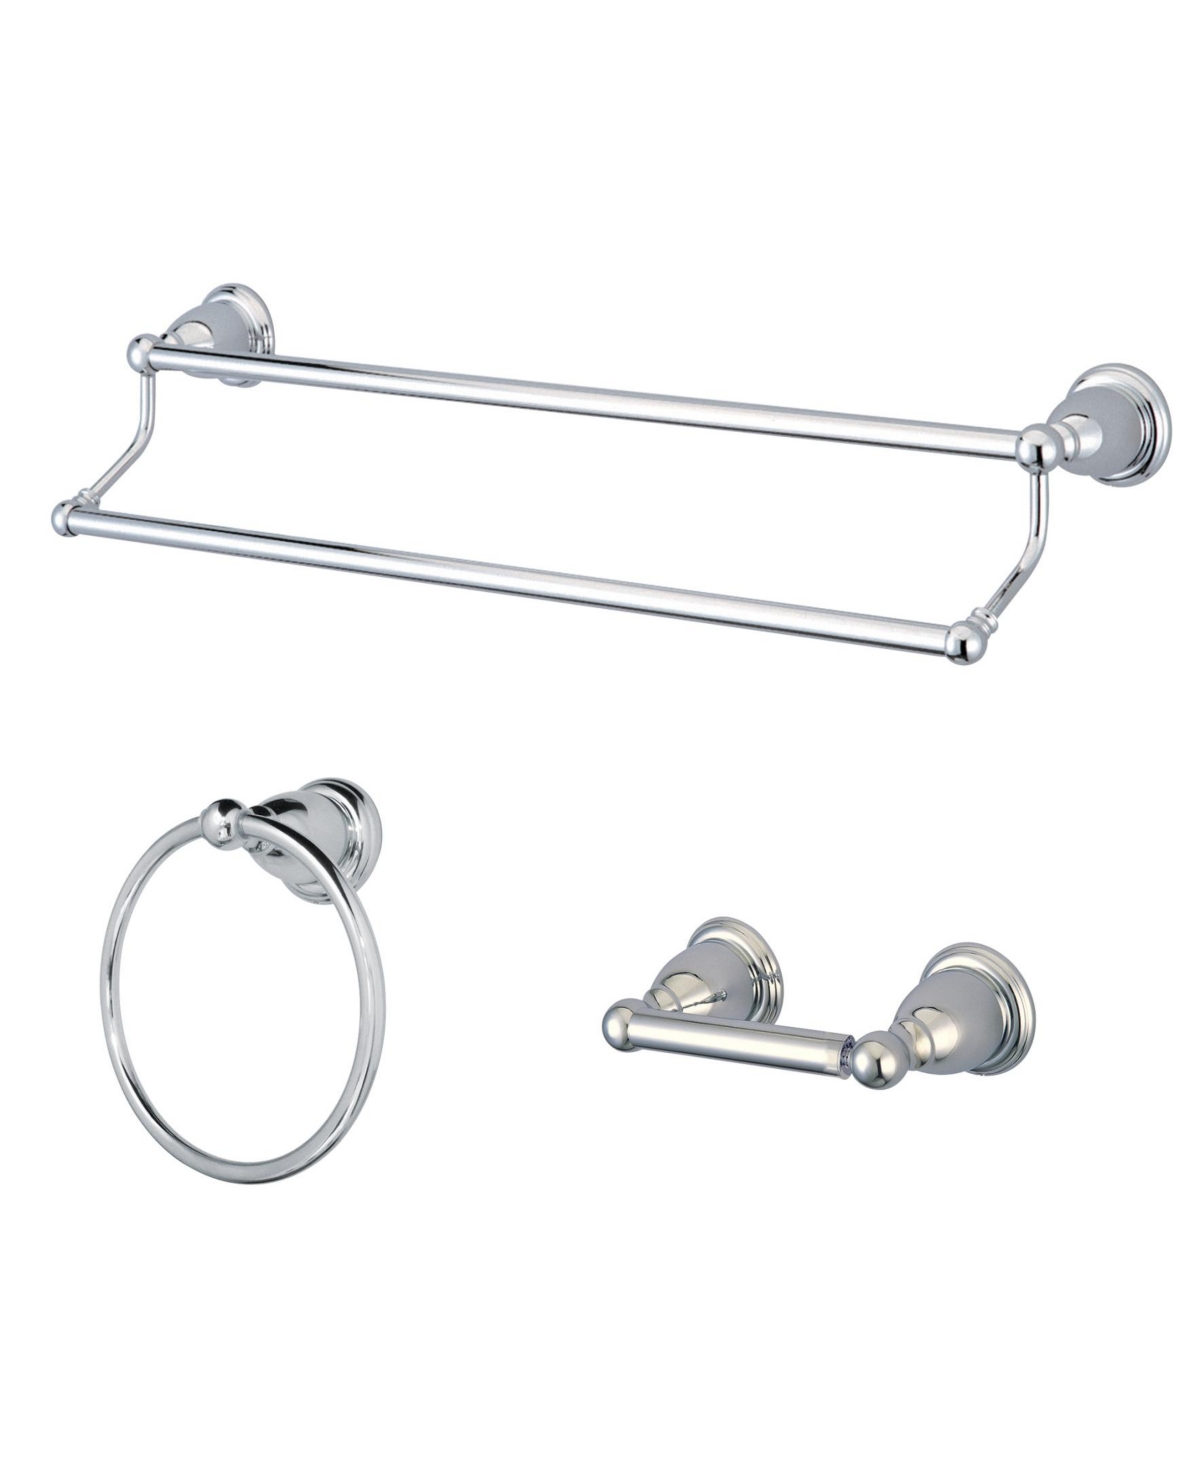 Kingston Brass Heritage 3-Pc. Dual Towel Bar Accessory Set in Polished Chrome Bedding